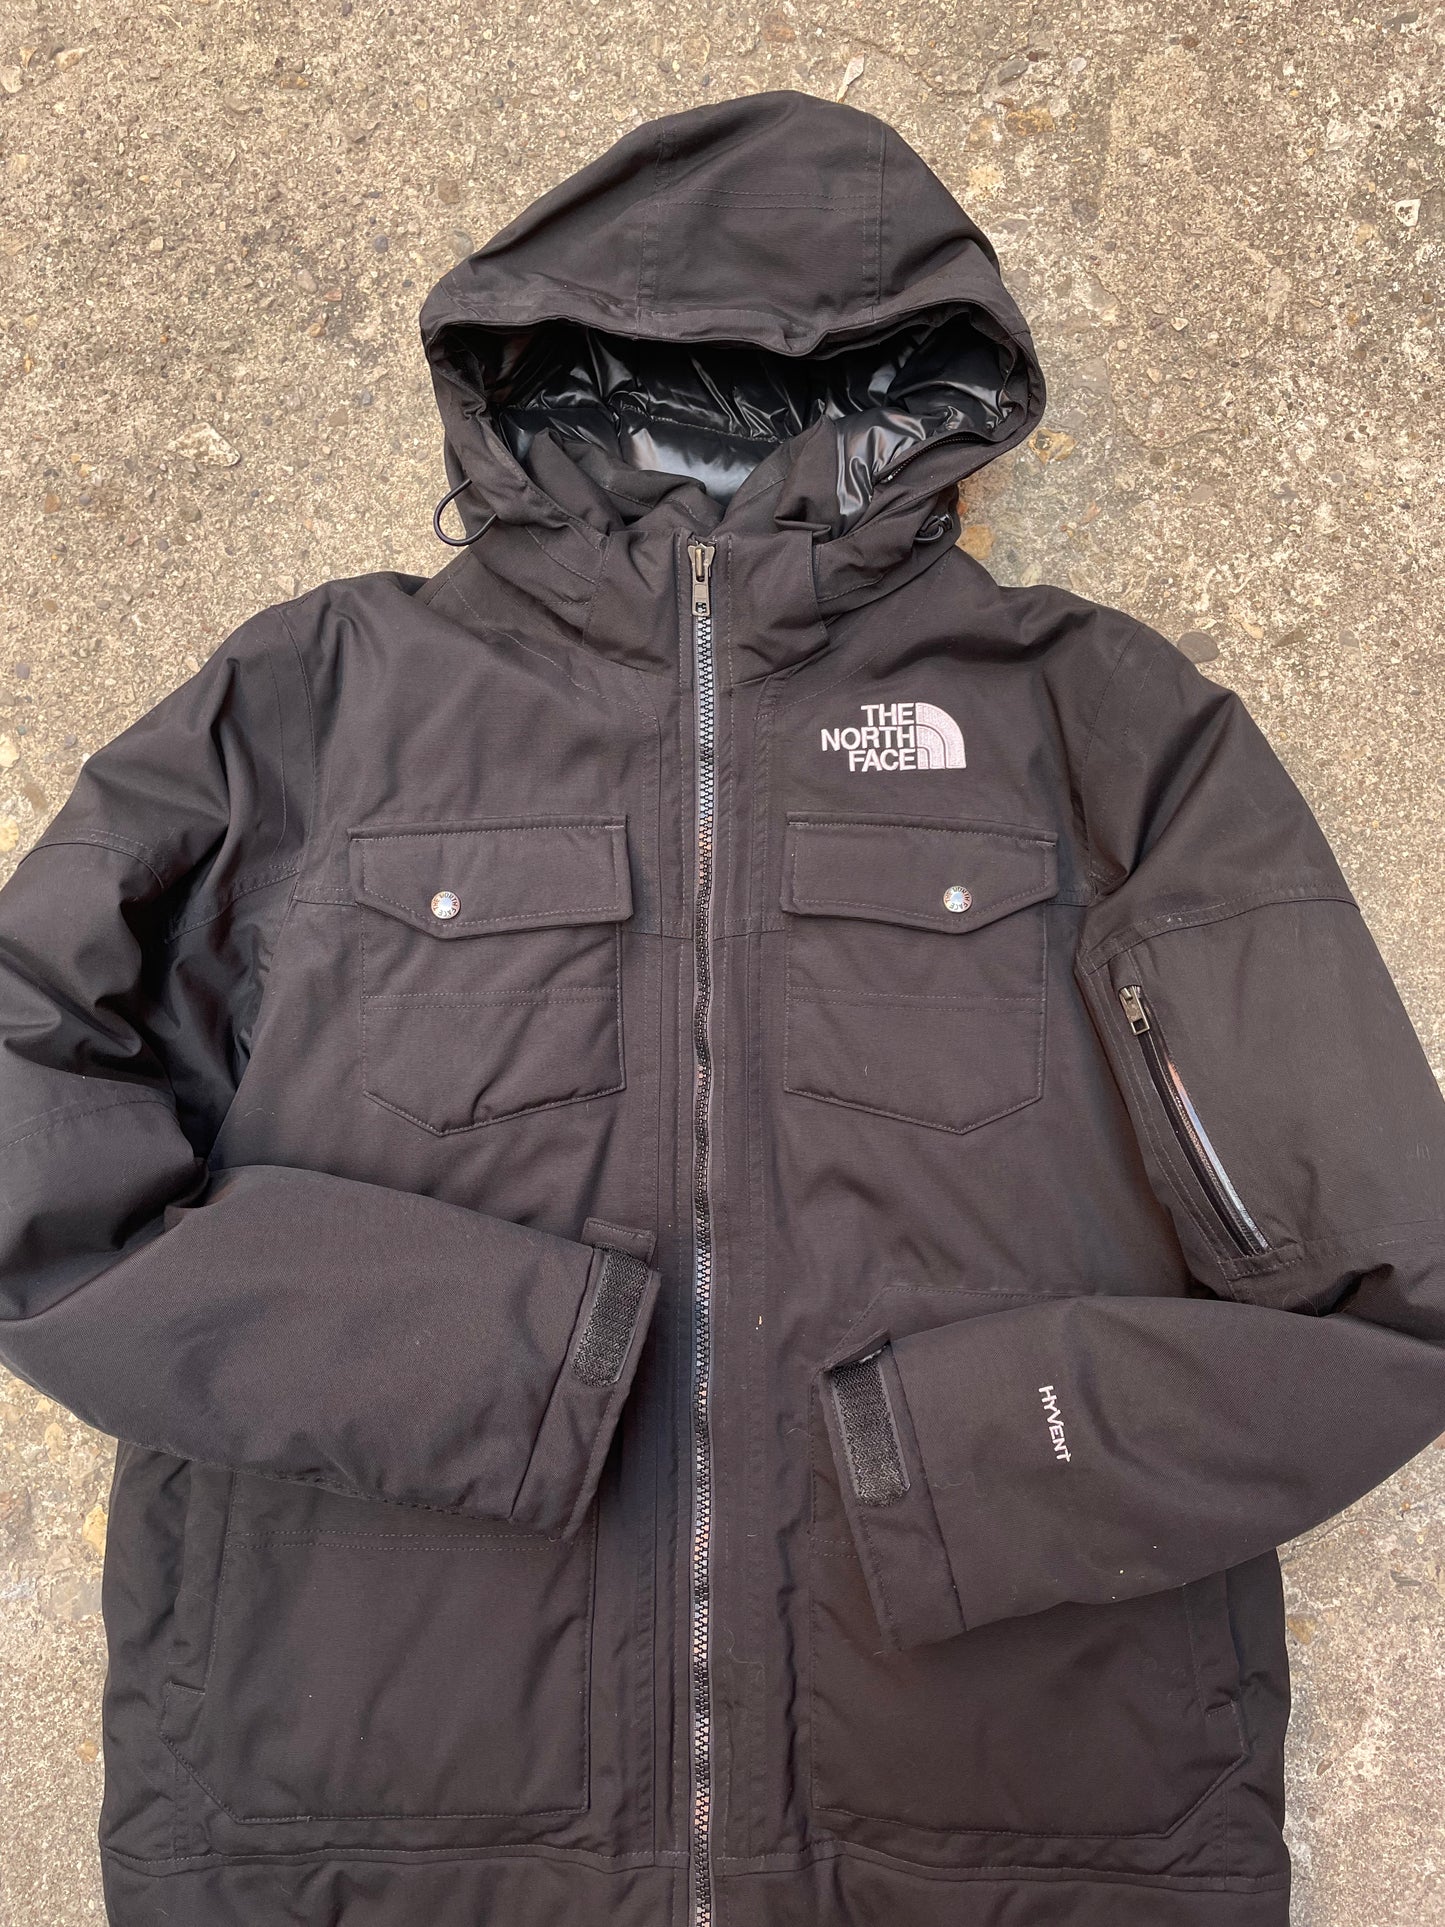 The North Face Hyvent Down Filled Puffer Parka Coat - L